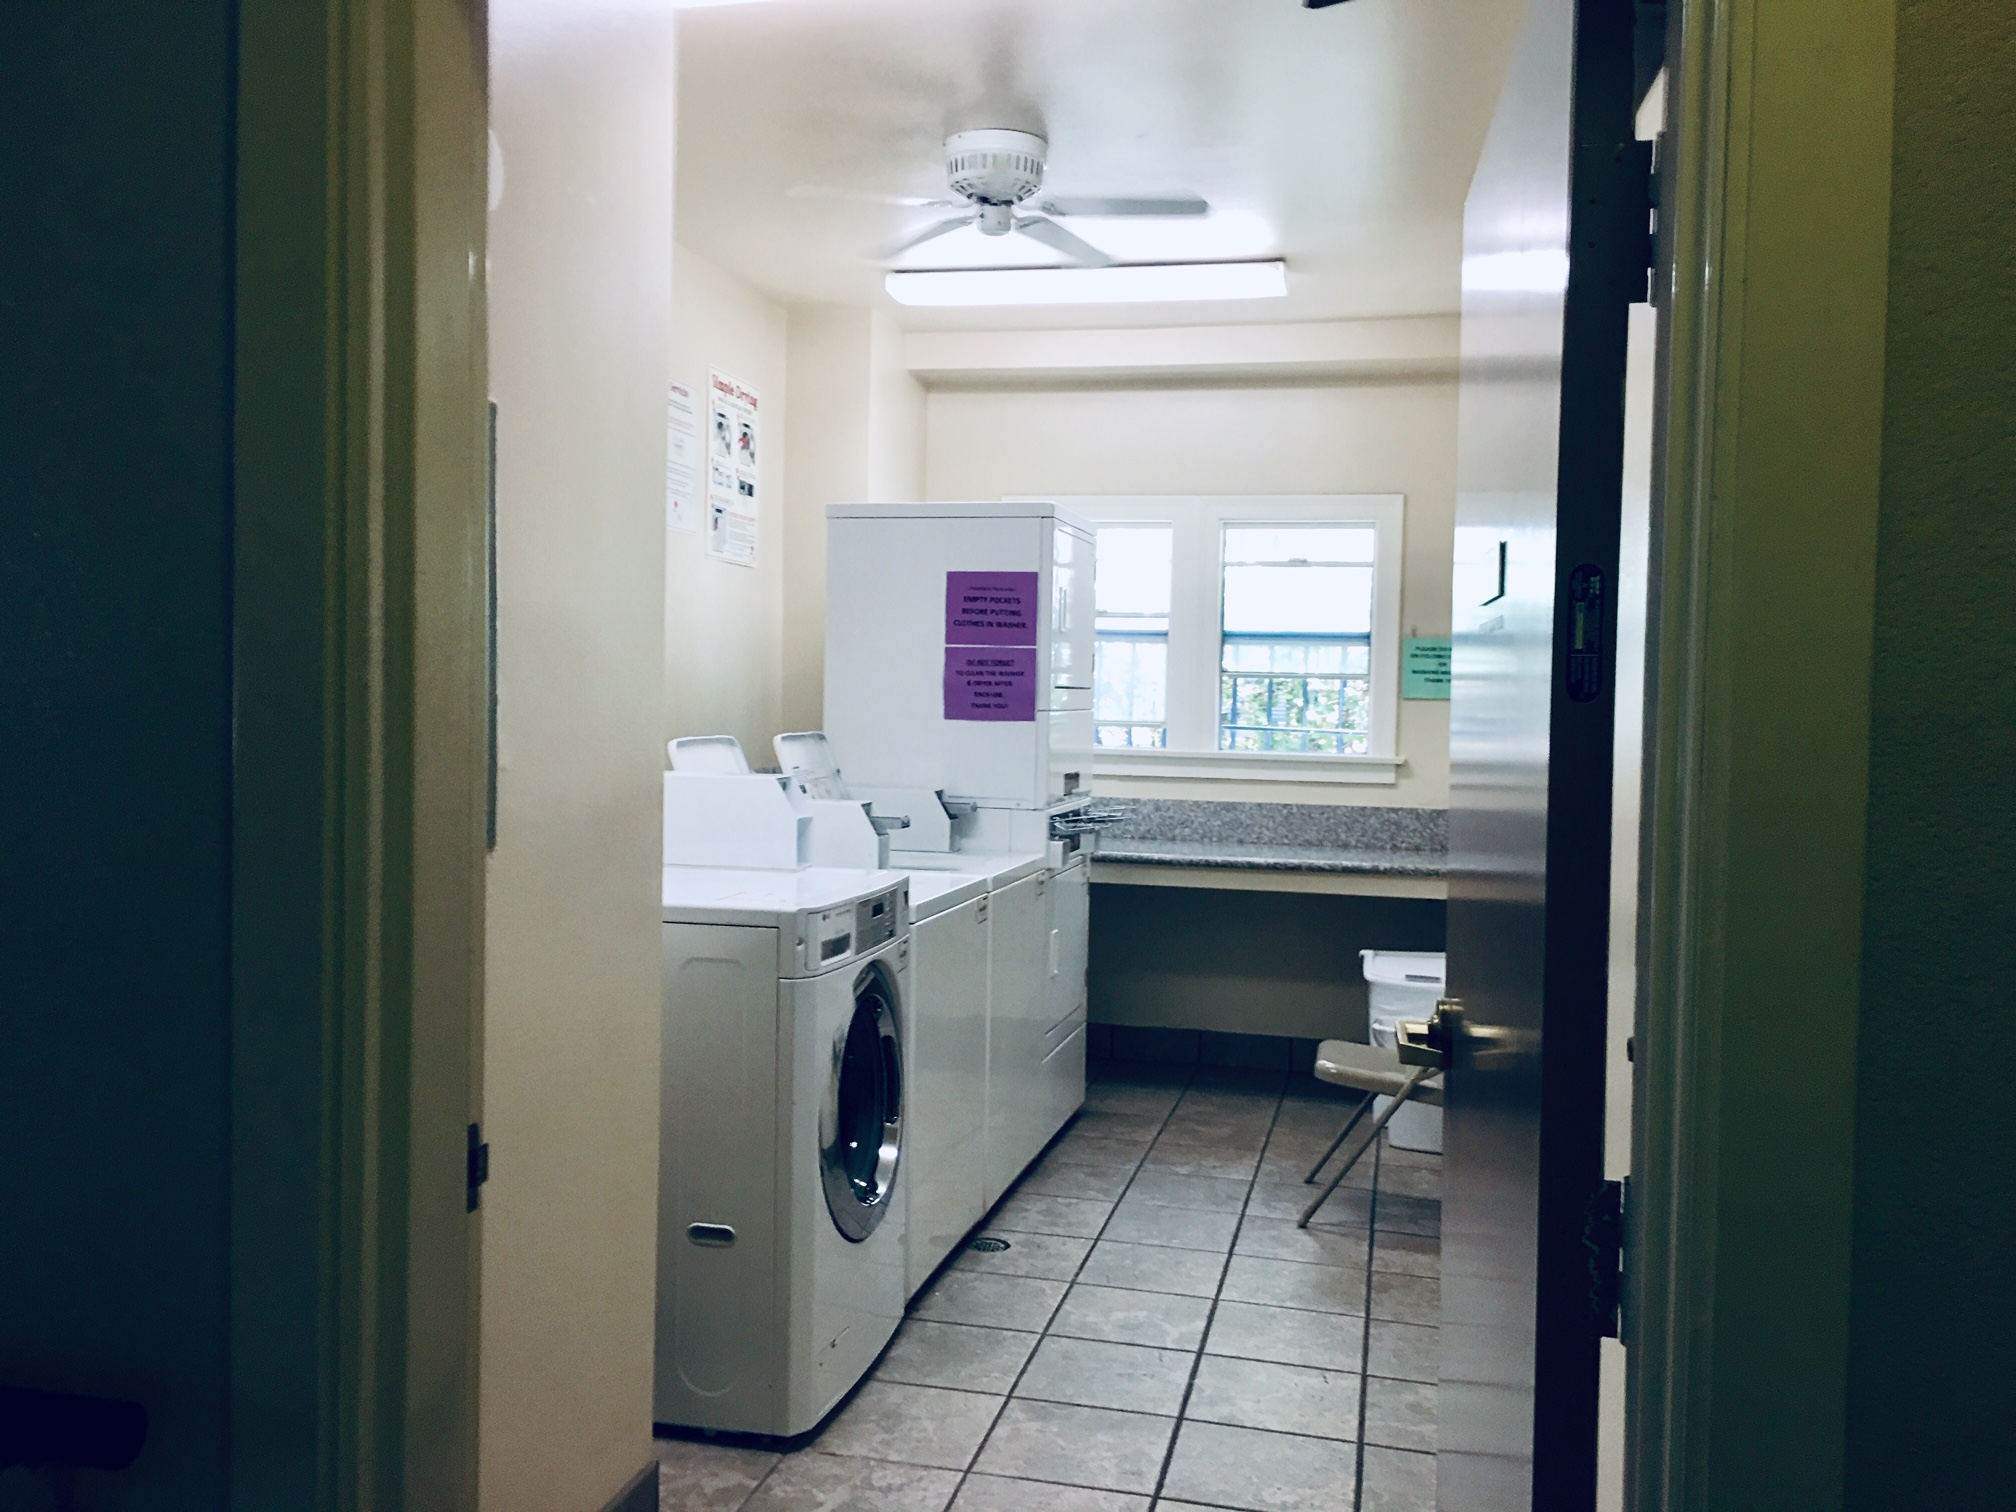 Laundry room with multiple washers and dryers. There is a folding shelf under the windows, and posted signs across the room. There is also a folding chair and a trash bin inside. Room also has a ceiling fan.